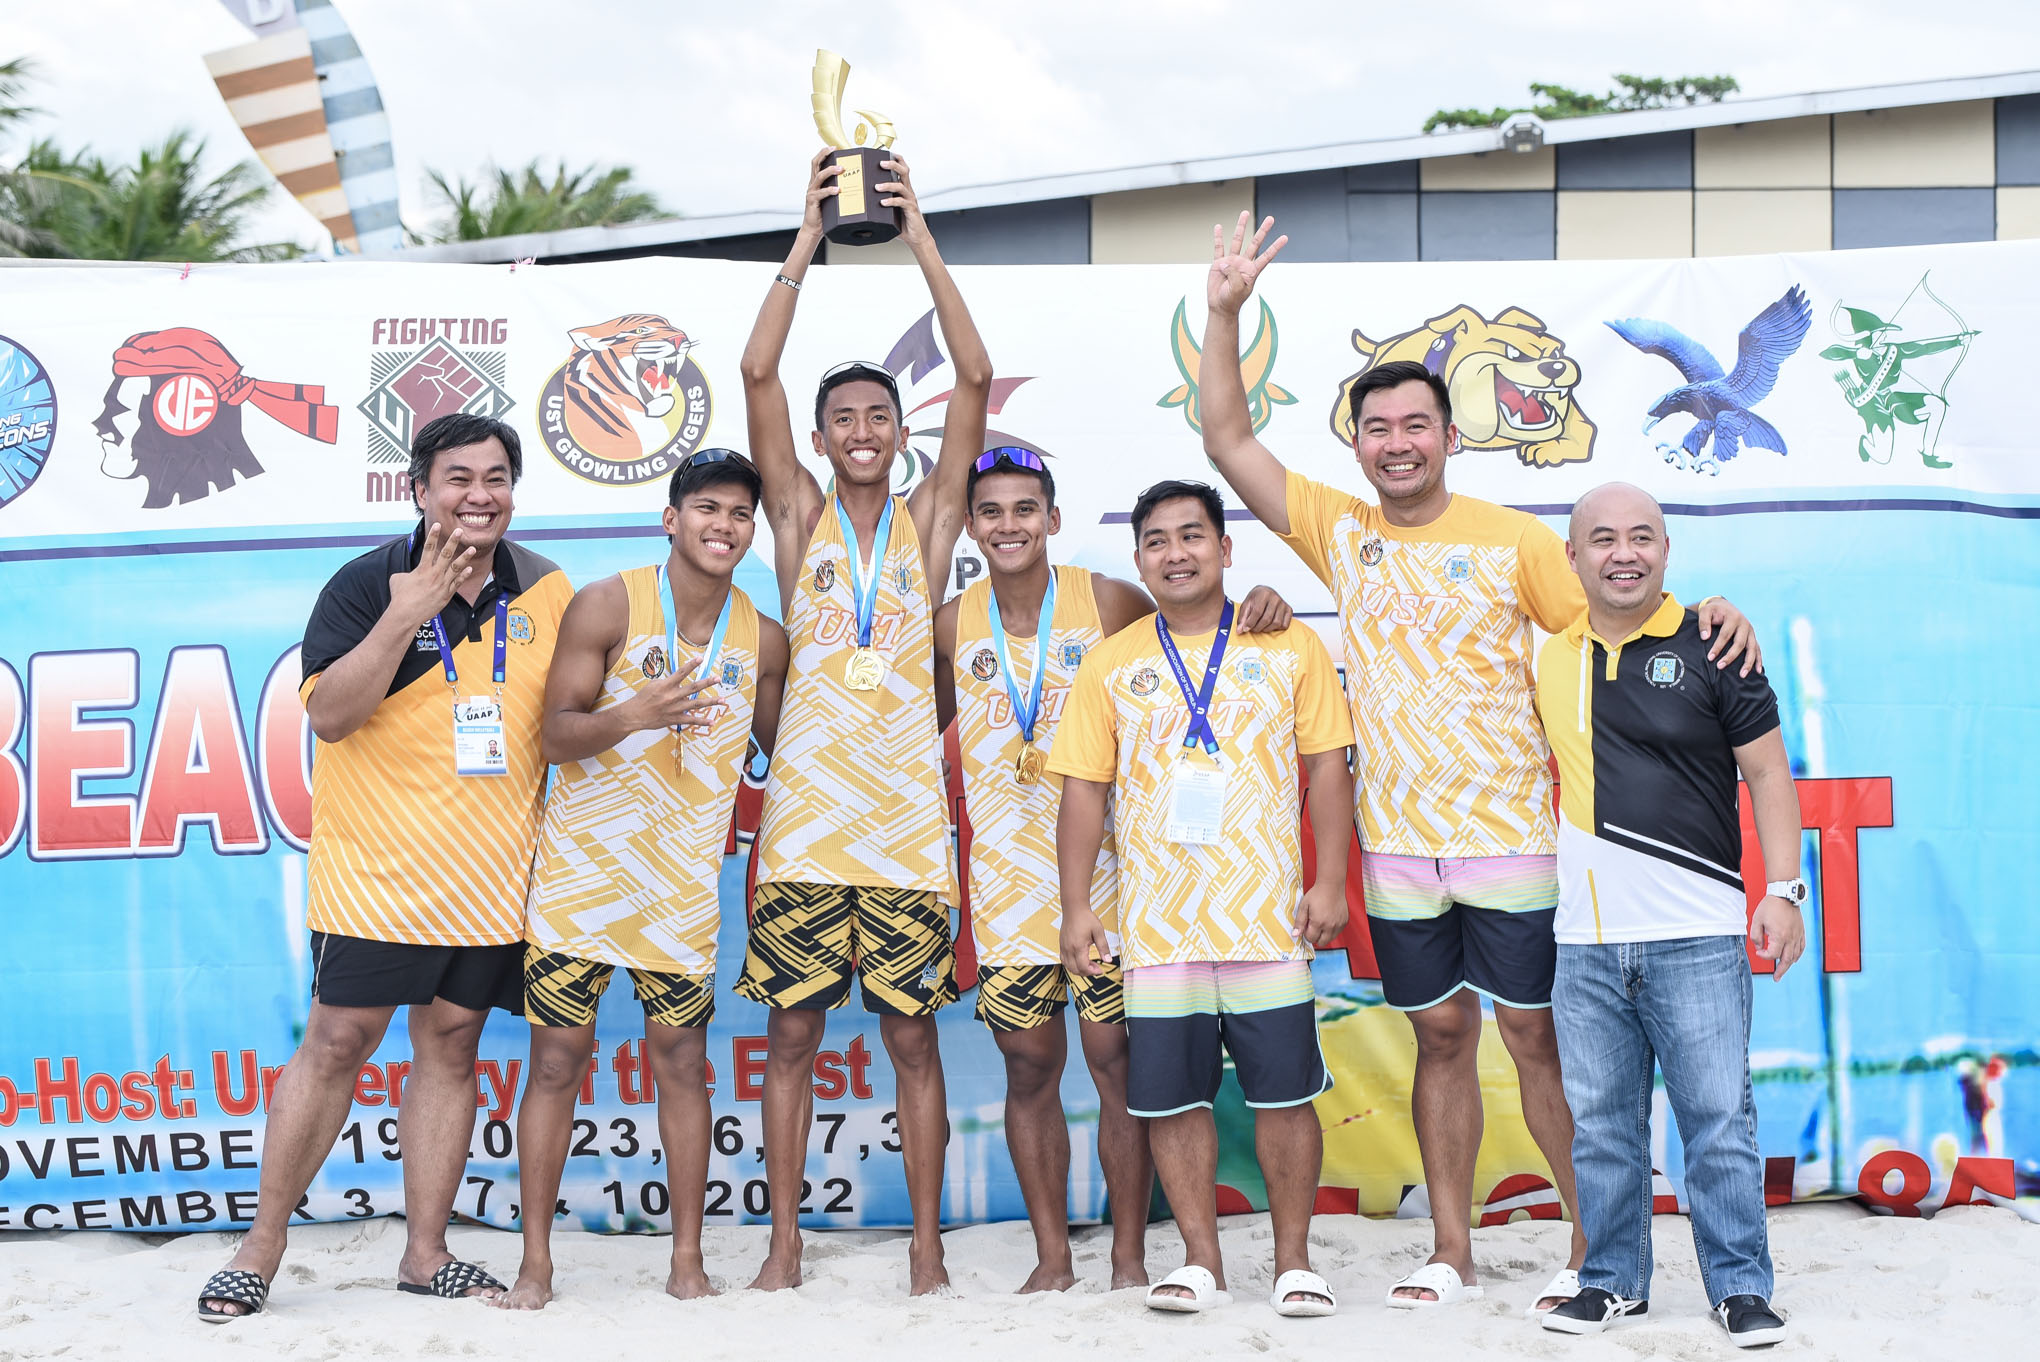 UAAP-MBVB-GOLD-UST-JARON-REQUINTON-RANCEL-VARGA-2 UAAP 85 MBVB: UST's Requinton-Varga downs NU's Buytrago-Salvador for fourth straight crown ADMU Beach Volleyball FEU News NU UAAP UST  - philippine sports news